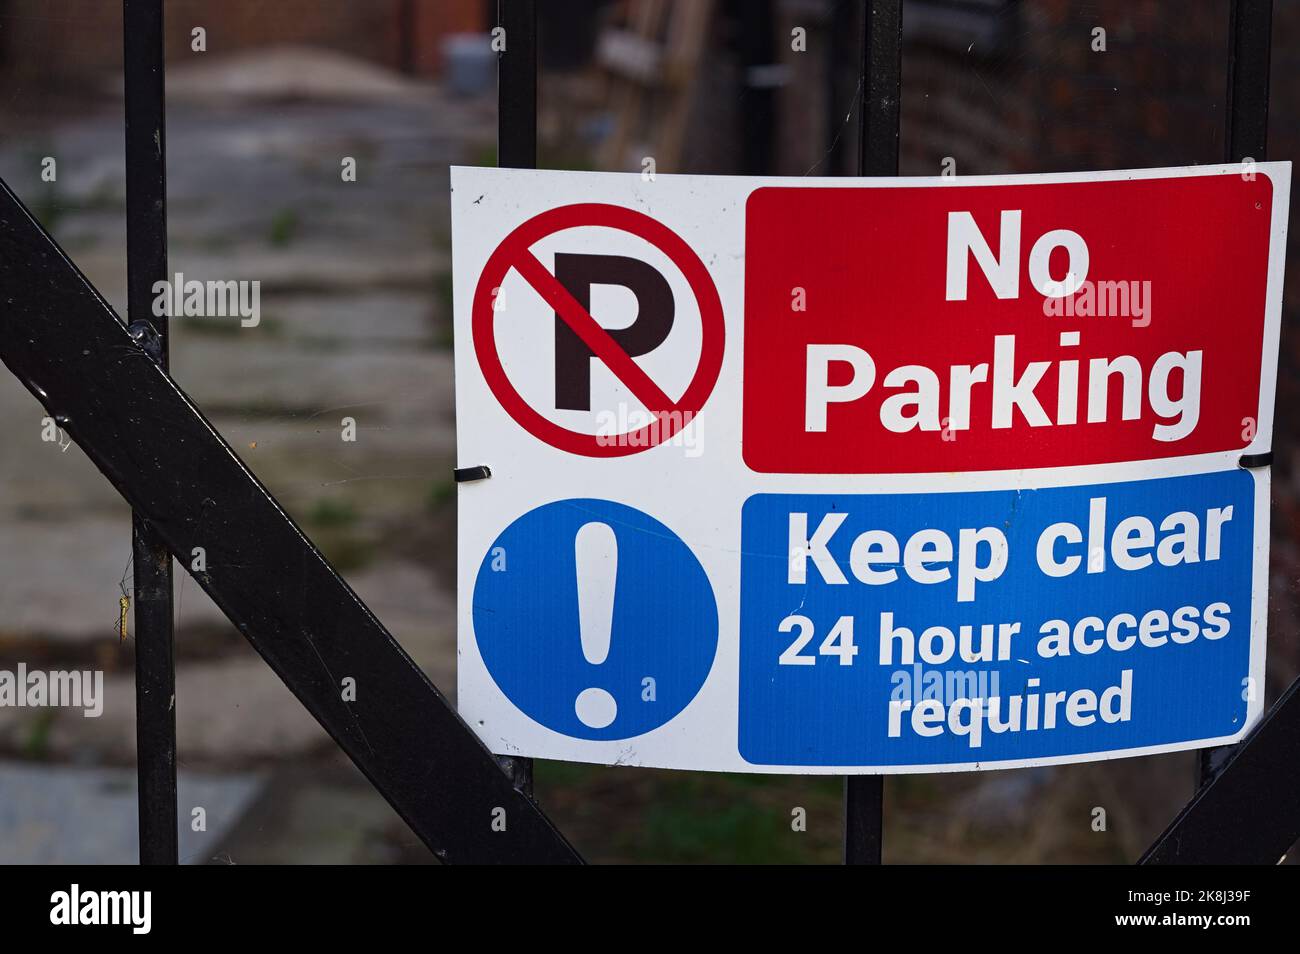 No Parking sign and symbols on a steel fence with soft focus background Stock Photo